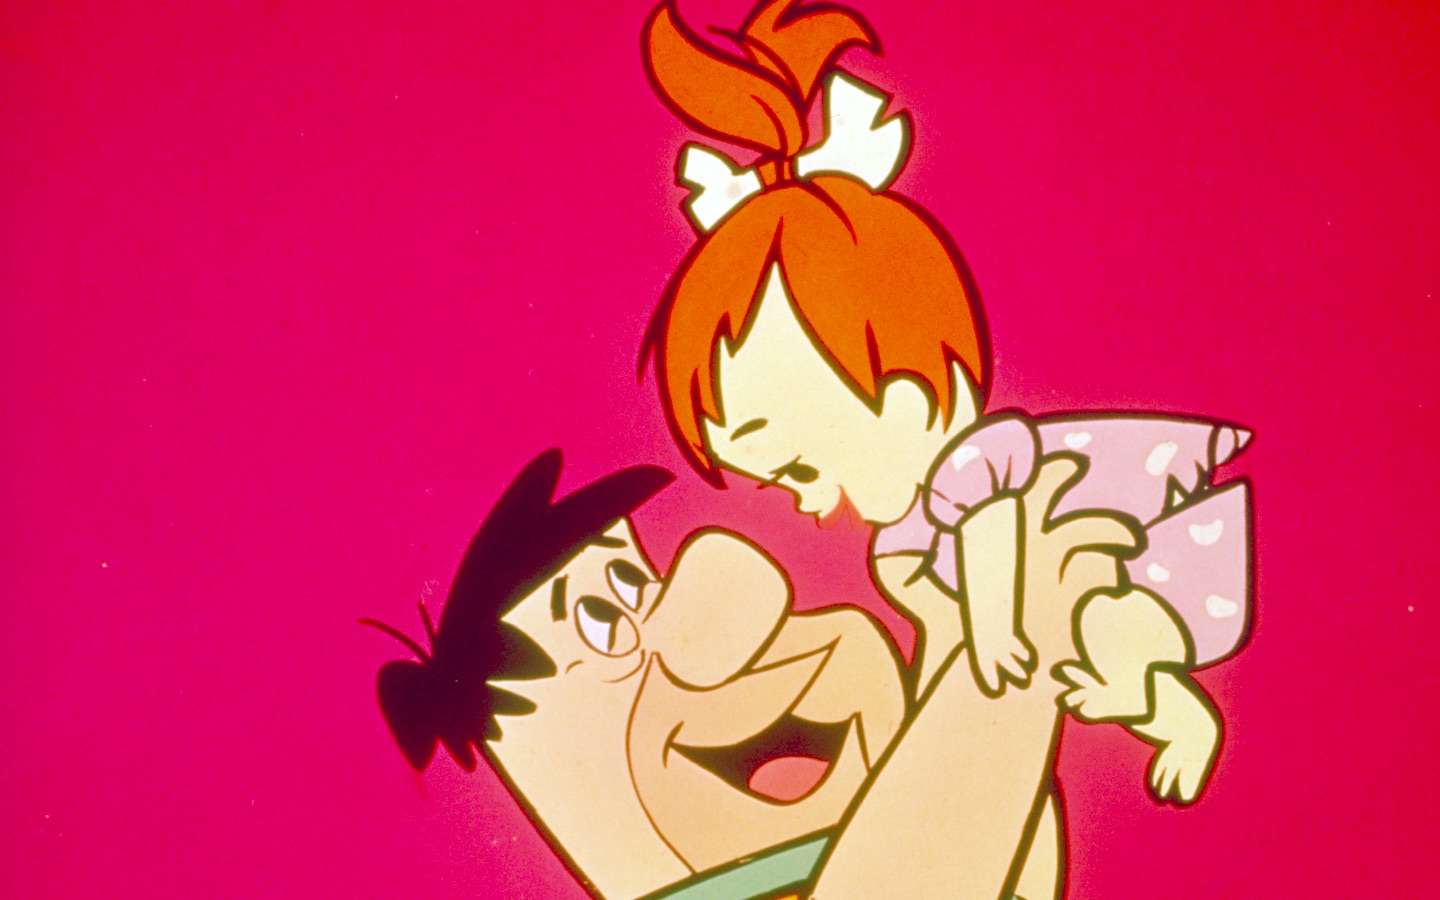 The Flintstones animated series about adult Pebbles in the works at Fox